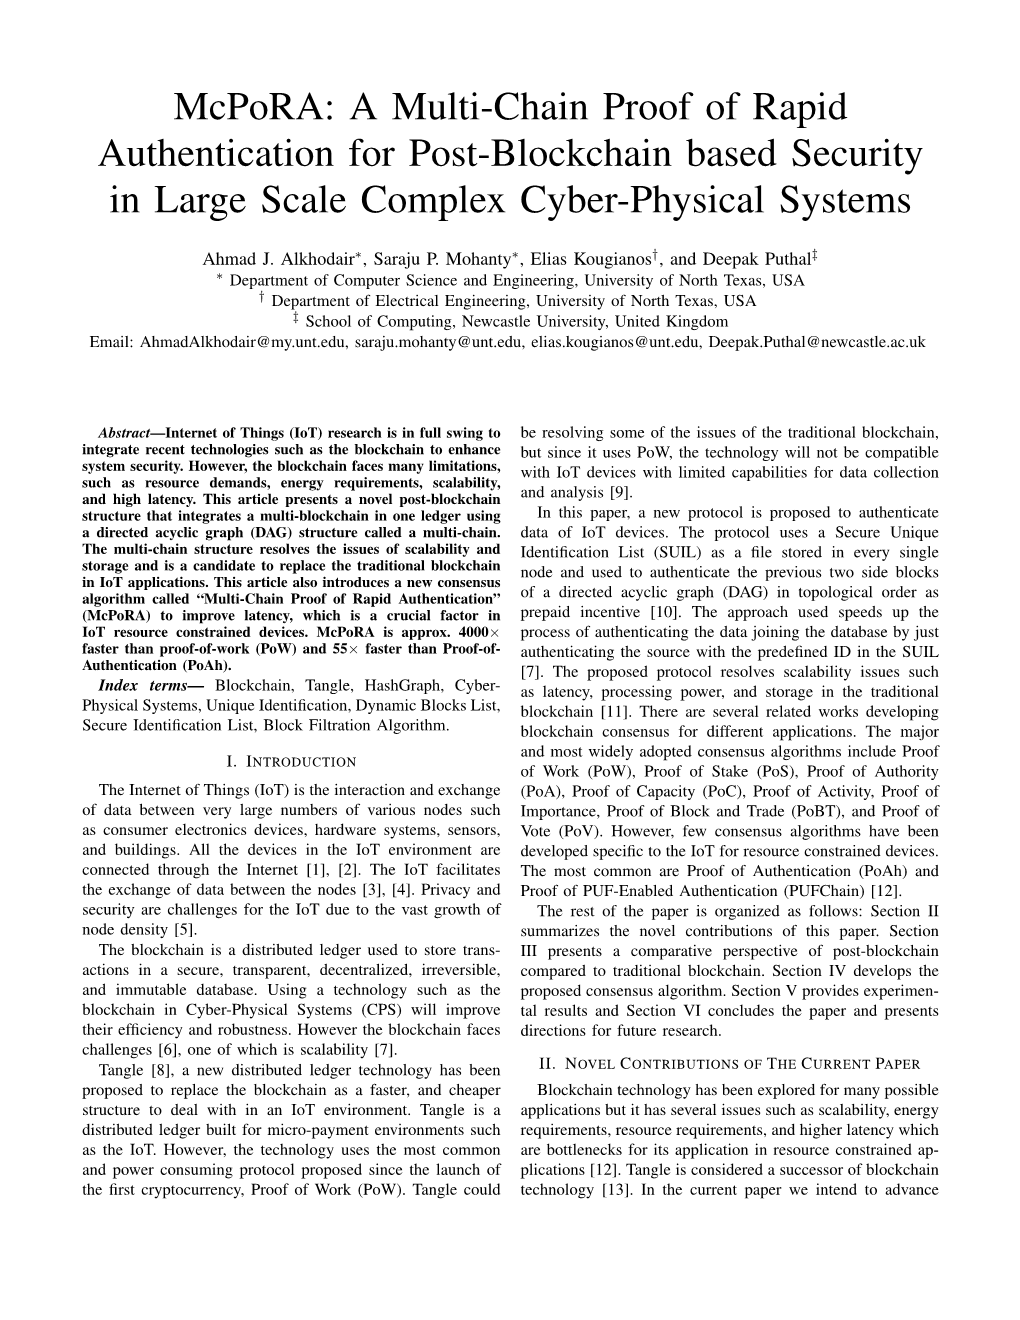 Mcpora: a Multi-Chain Proof of Rapid Authentication for Post-Blockchain Based Security in Large Scale Complex Cyber-Physical Systems